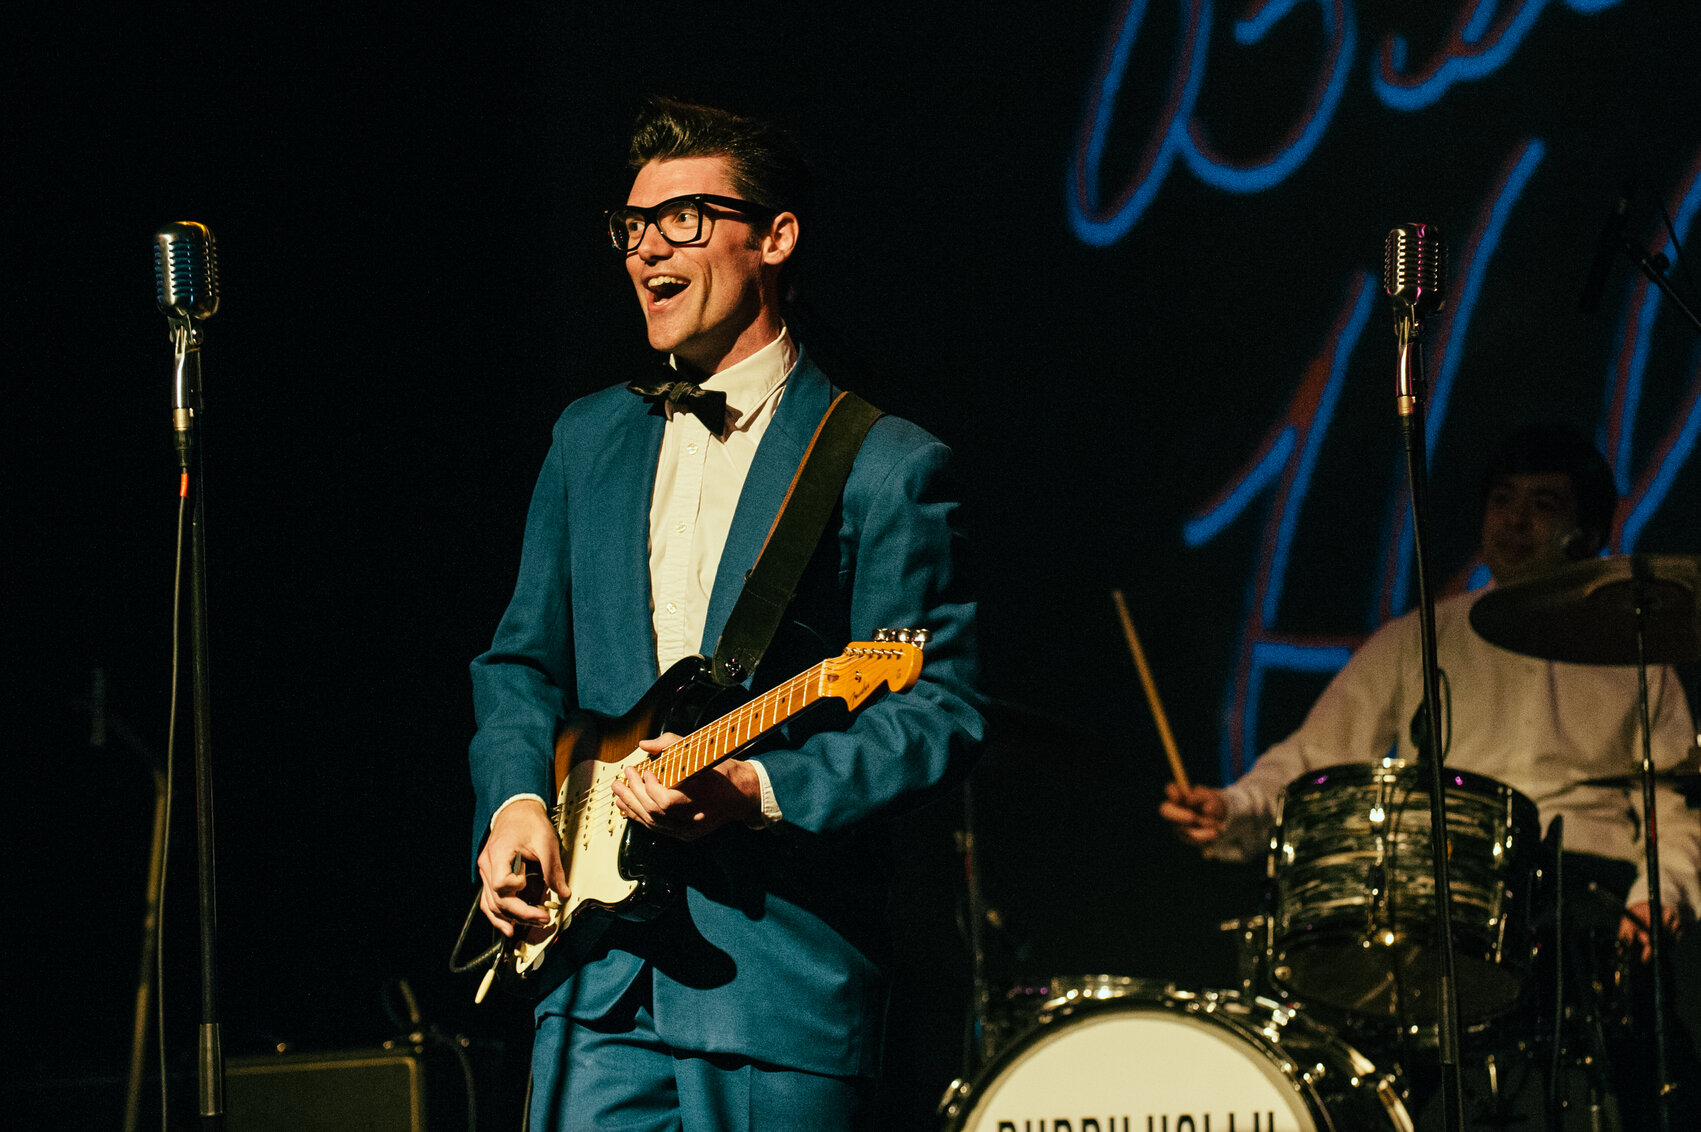 Award winning “Buddy Holly” performer to play Sunshine Coast for first time this summer